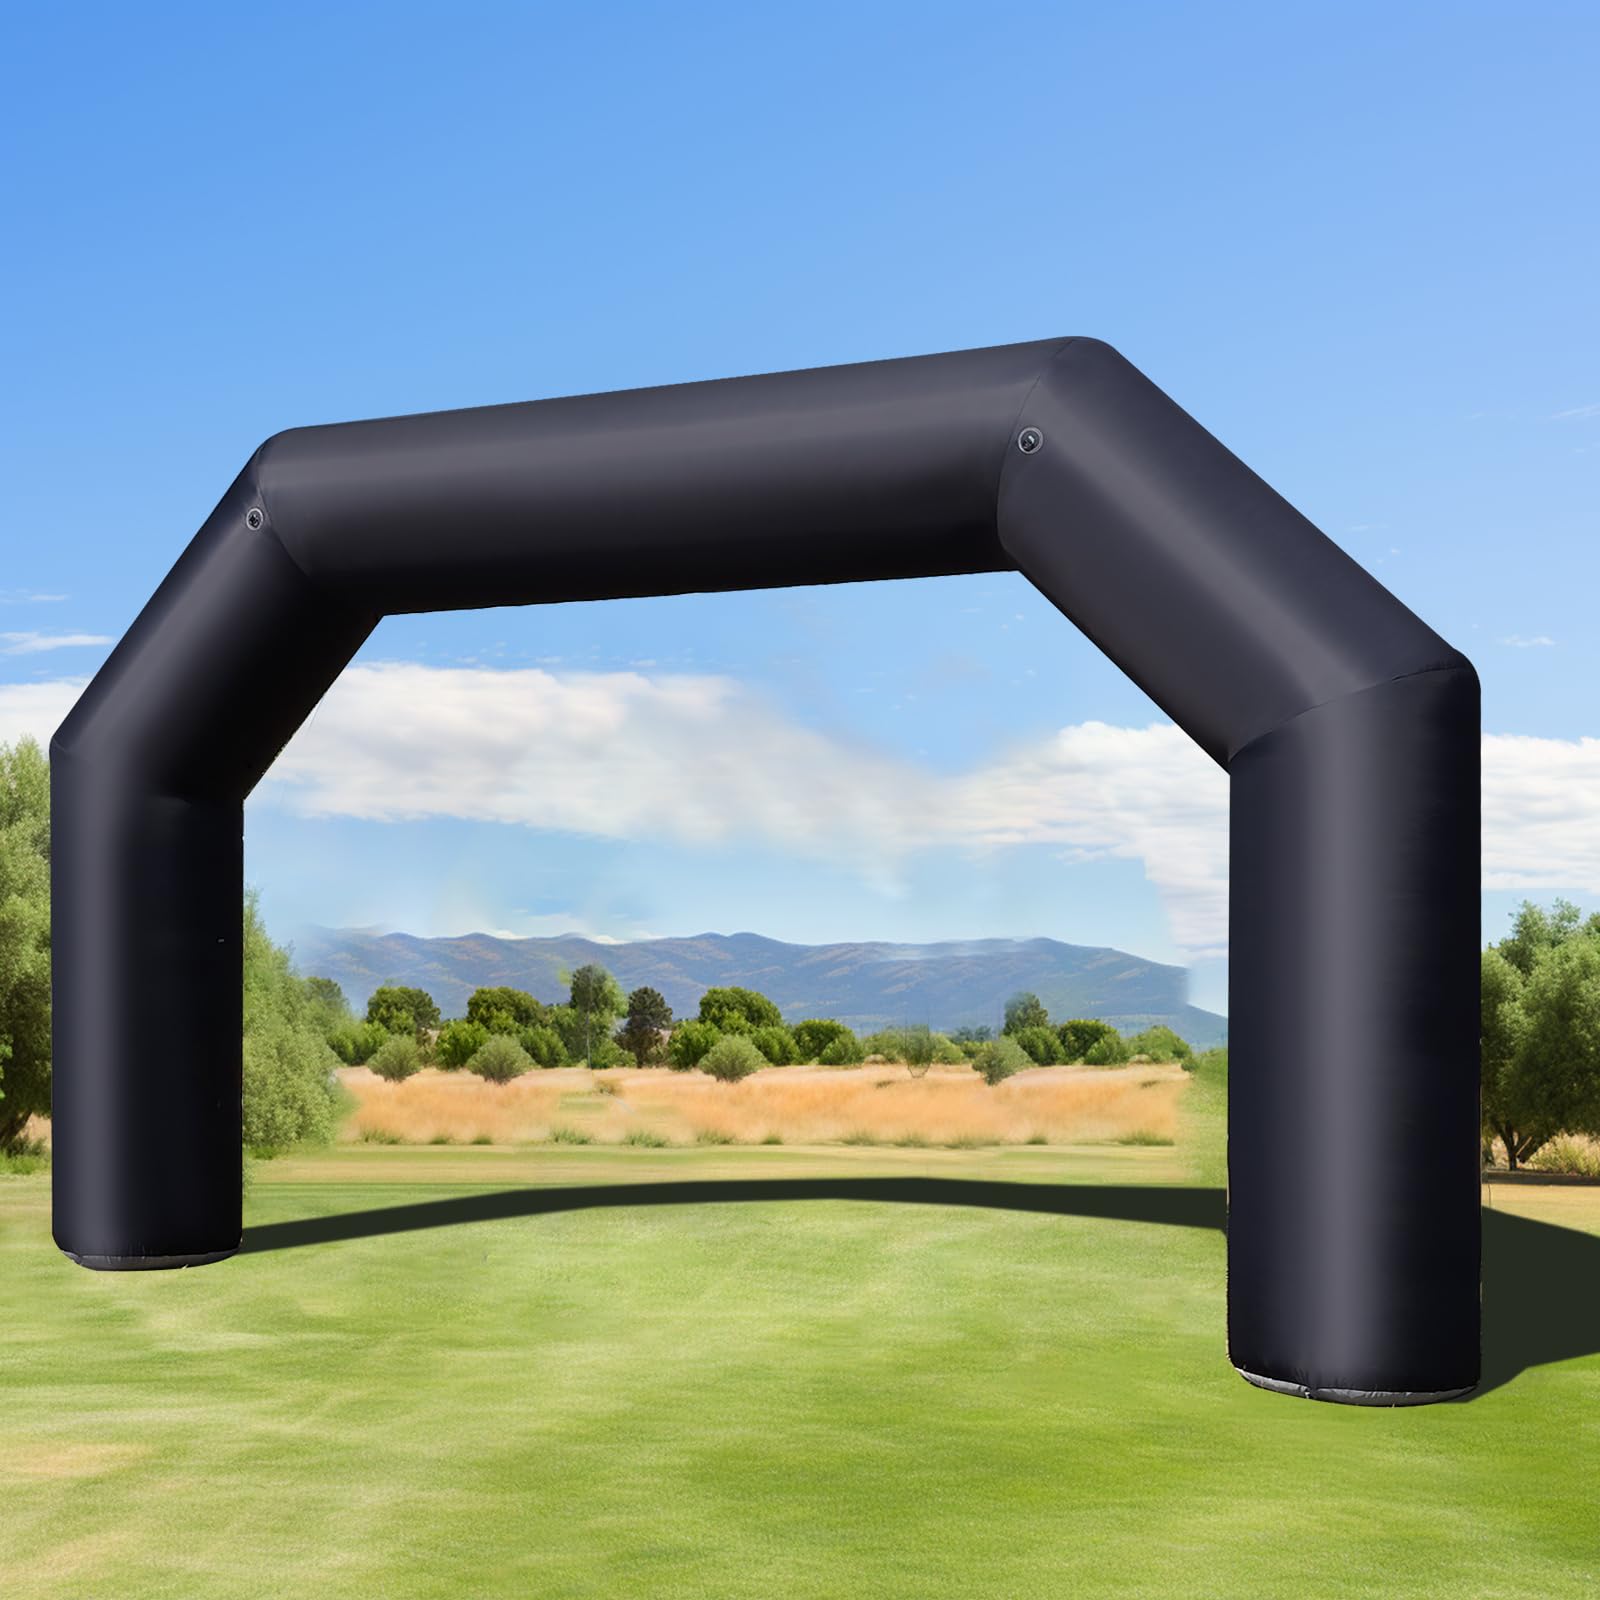 Best Deal-20ft Black Inflatable Arch With 150w Blower -Lightweight Arch & Perfect For 5k Run Races Marathons Promotional Events